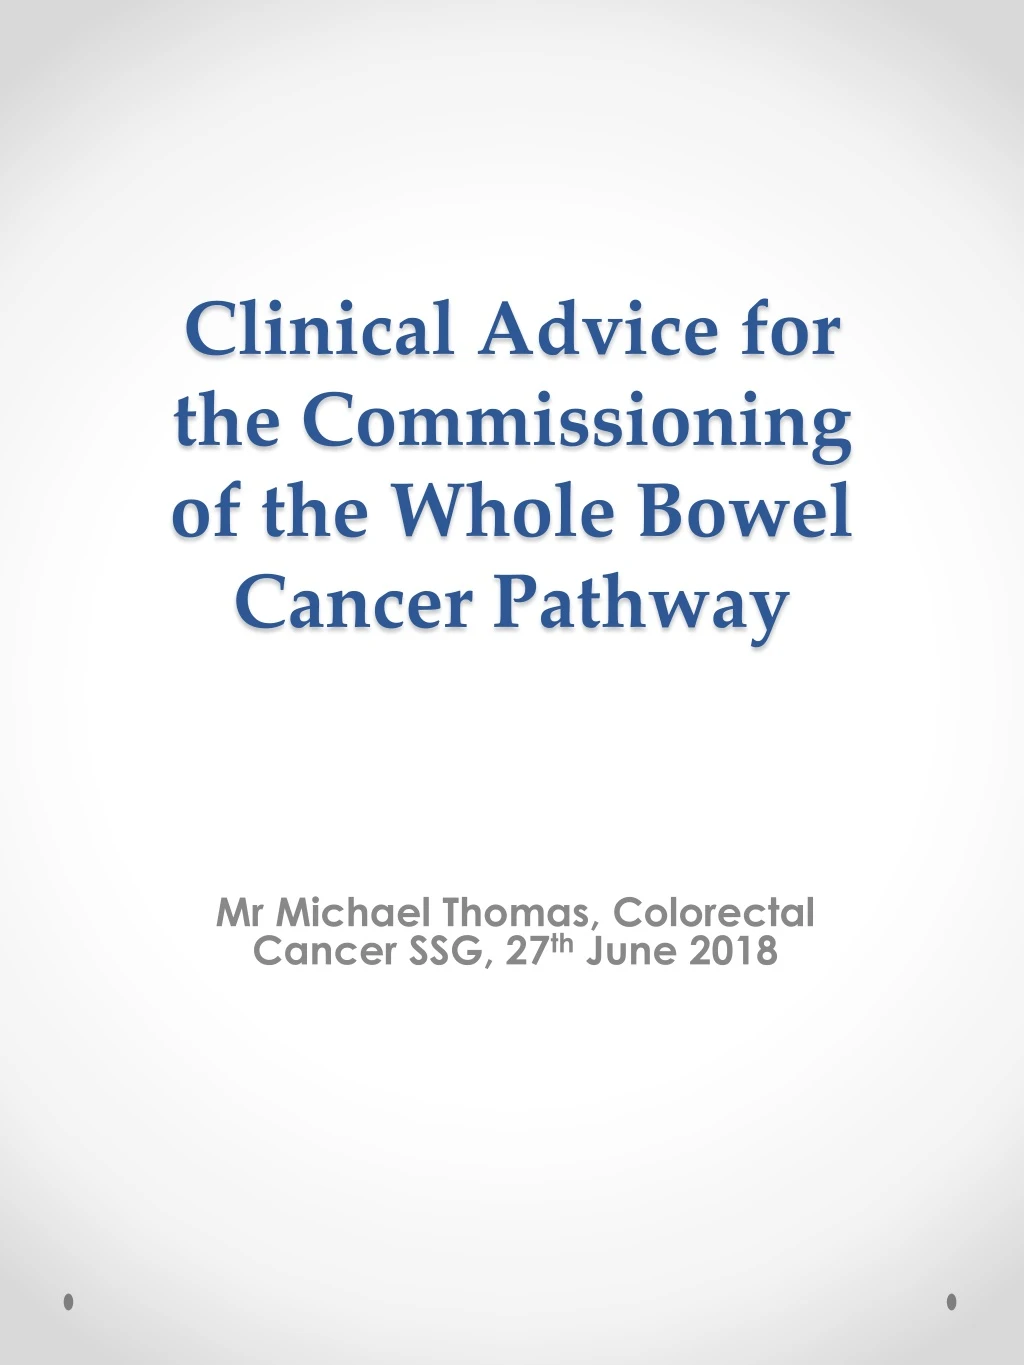 clinical advice for the commissioning of the whole bowel cancer pathway